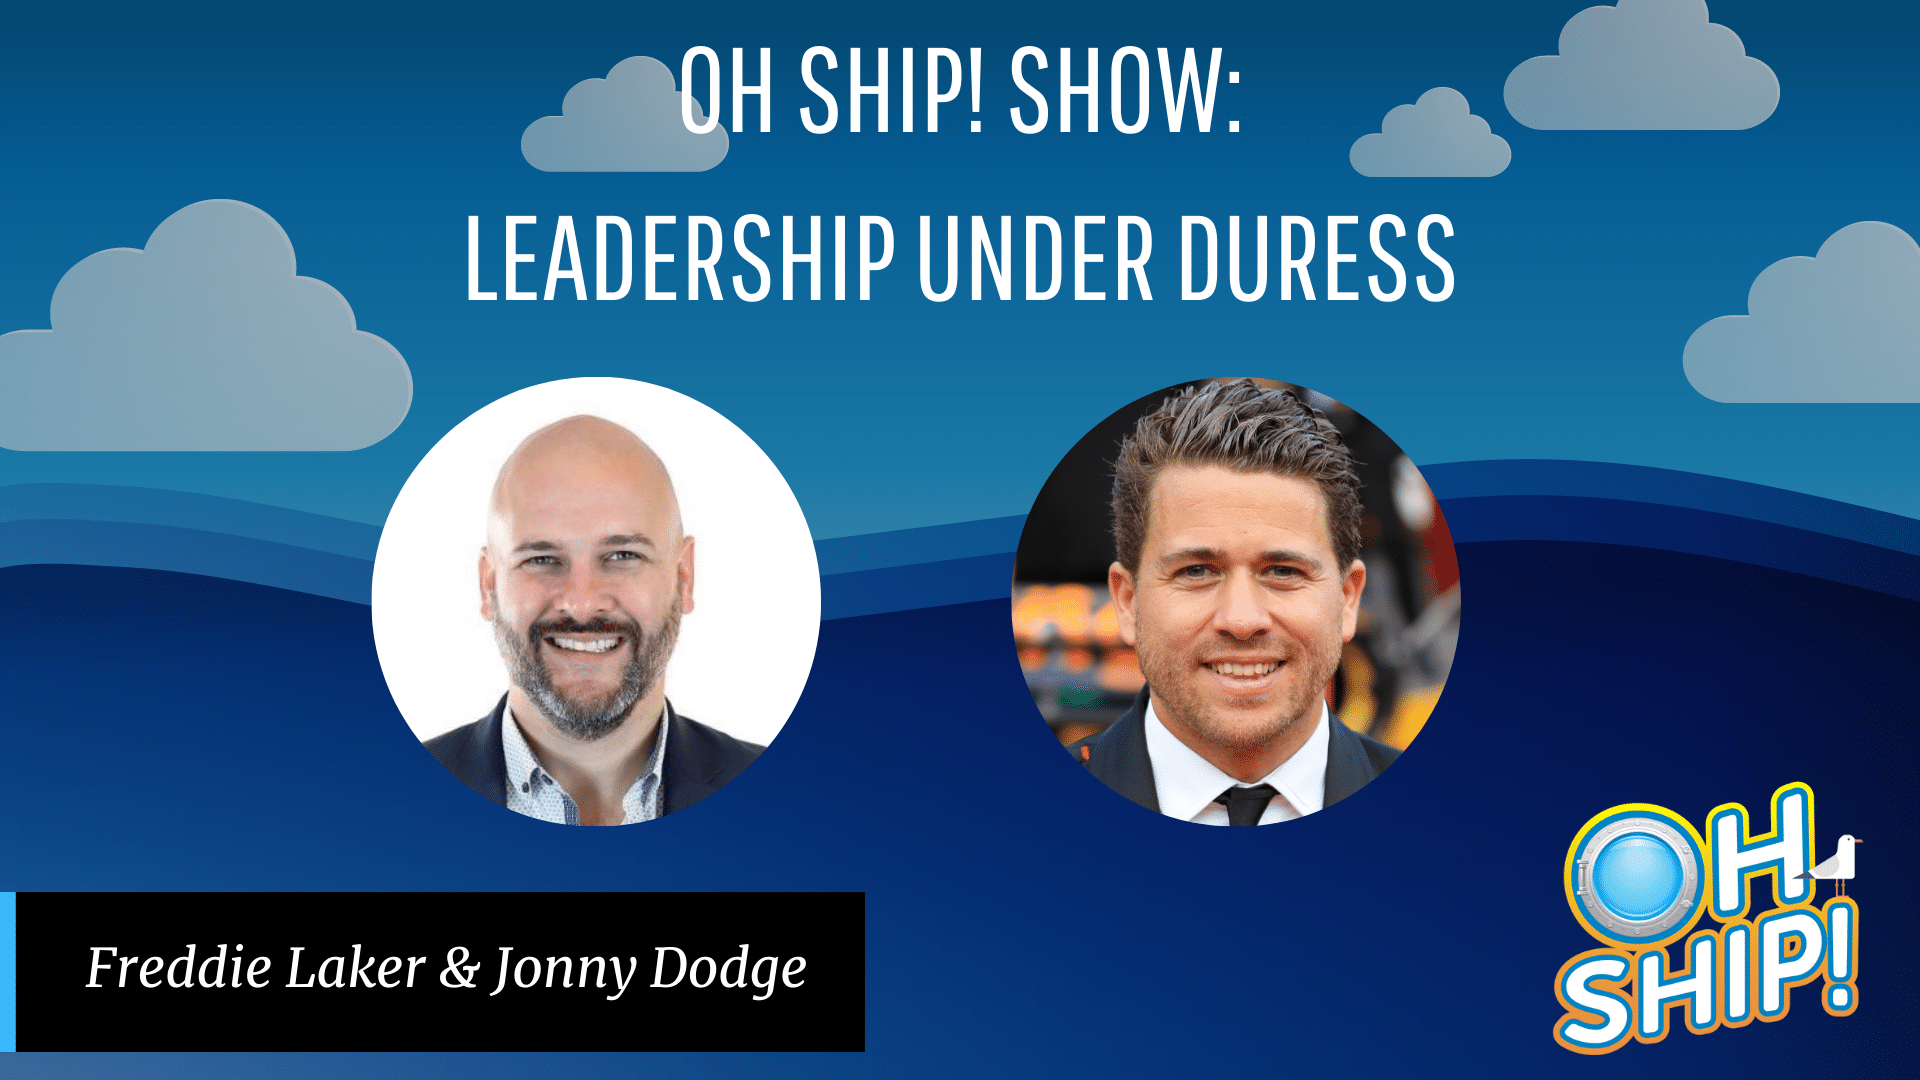 Promotional image for the "Oh Ship! Show" featuring headshots of two men titled "Leadership Under Duress." The names "Freddie Laker & Jonny Dodge" appear in a black box at the bottom left, with the show logo at the bottom right against a cloud-themed background.